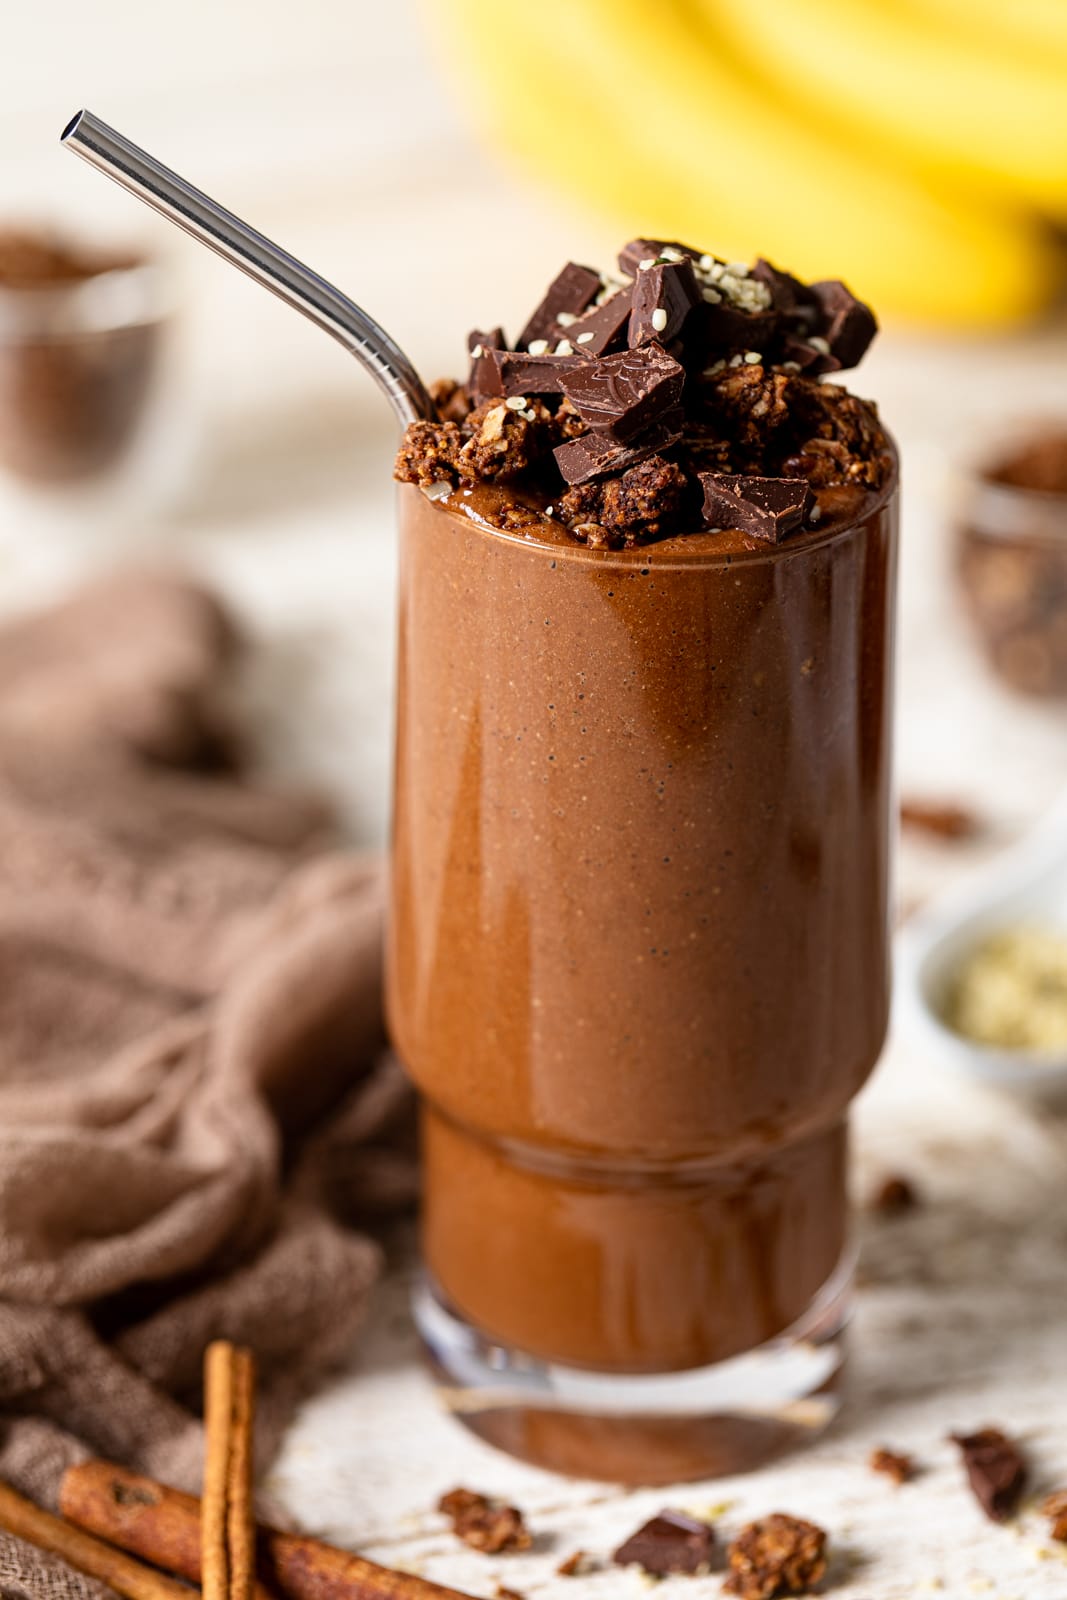 Chocolate Banana Smoothie with Espresso topped with chocolate pieces